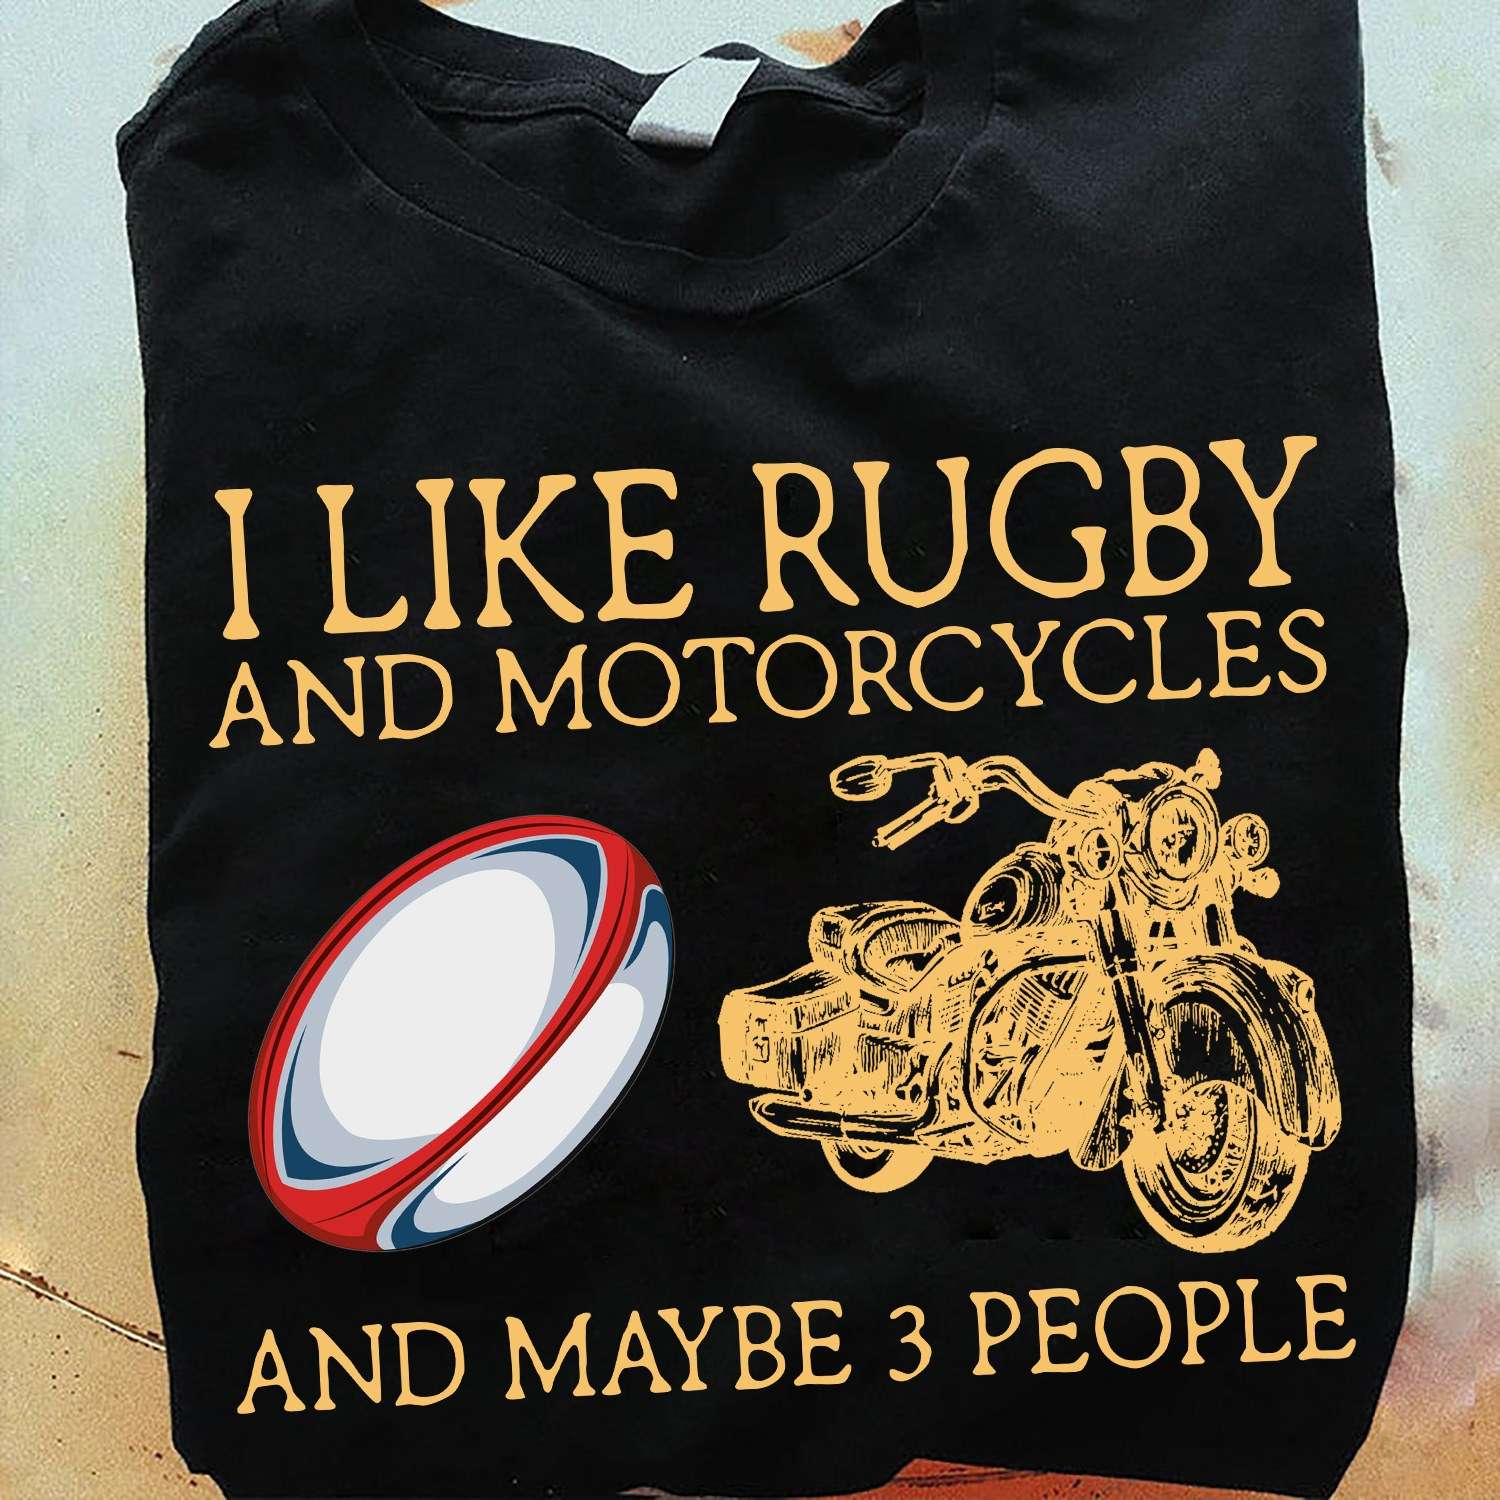 I-like-rugby-and-motorcycle-and-maybe-3-people-Rugby-the-sport.jpg